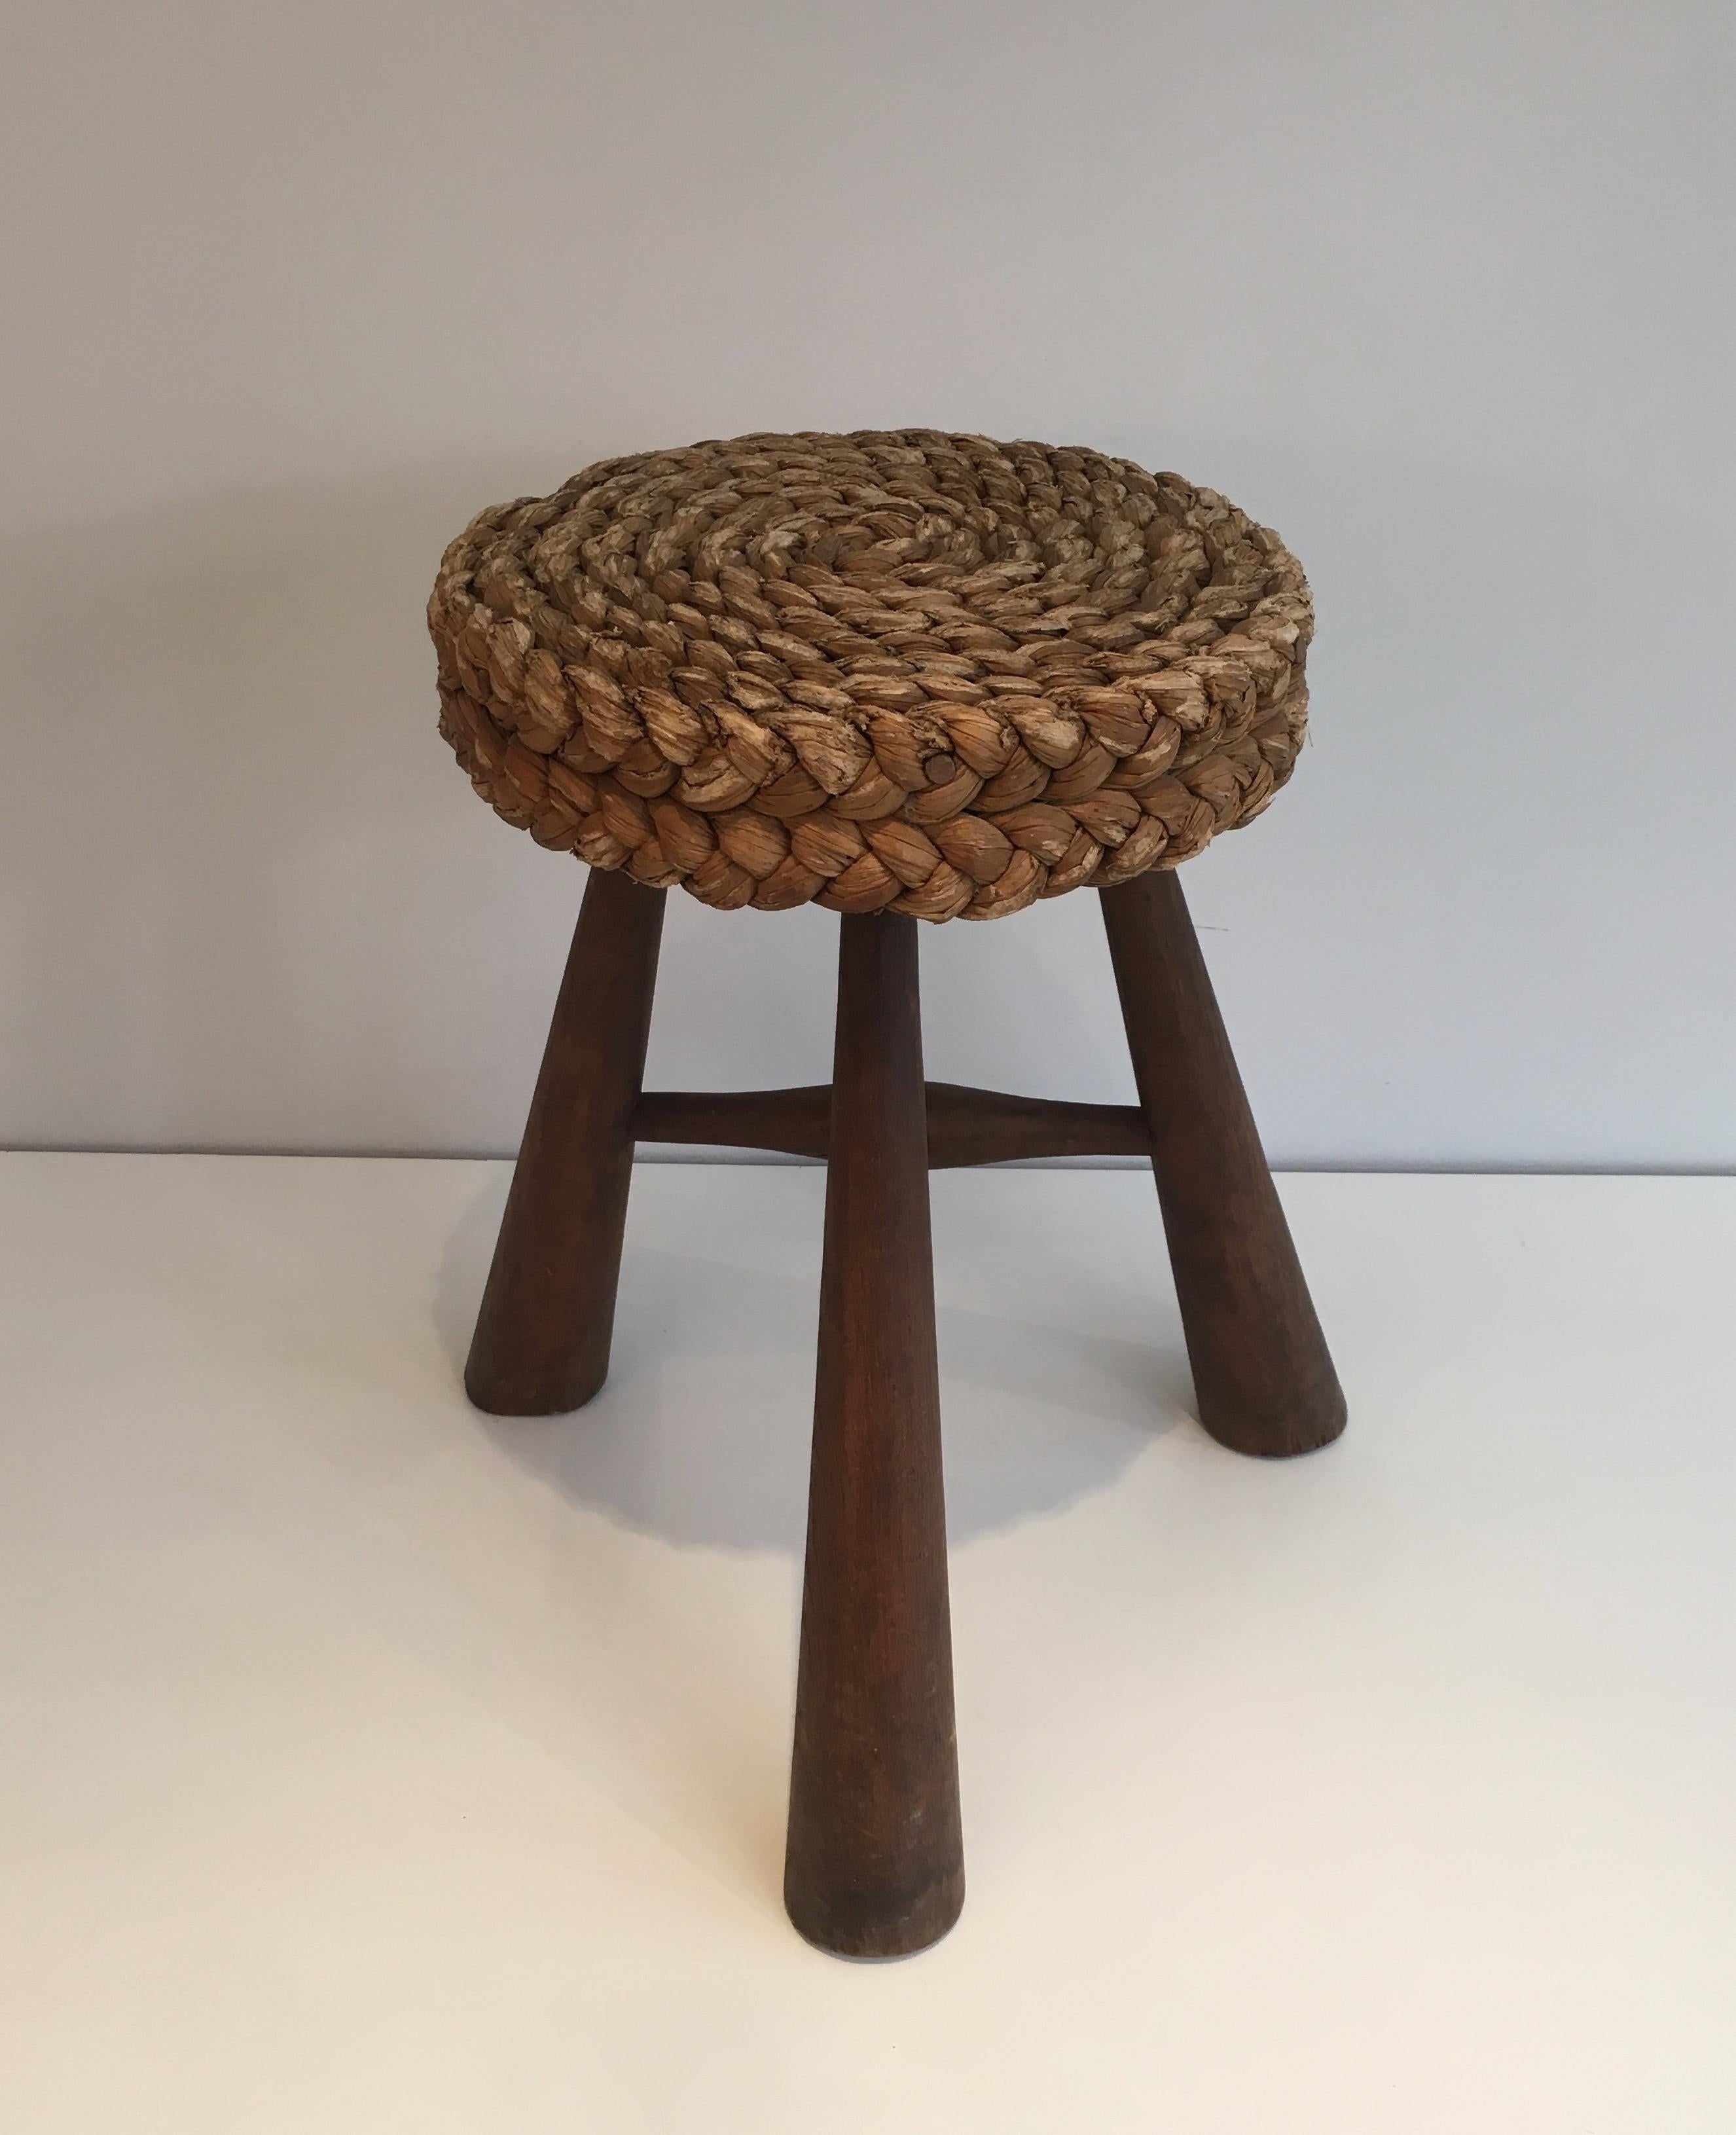 Mid-Century Modern Audoux Minet, Wood and Rope Stool, French, circa 1950